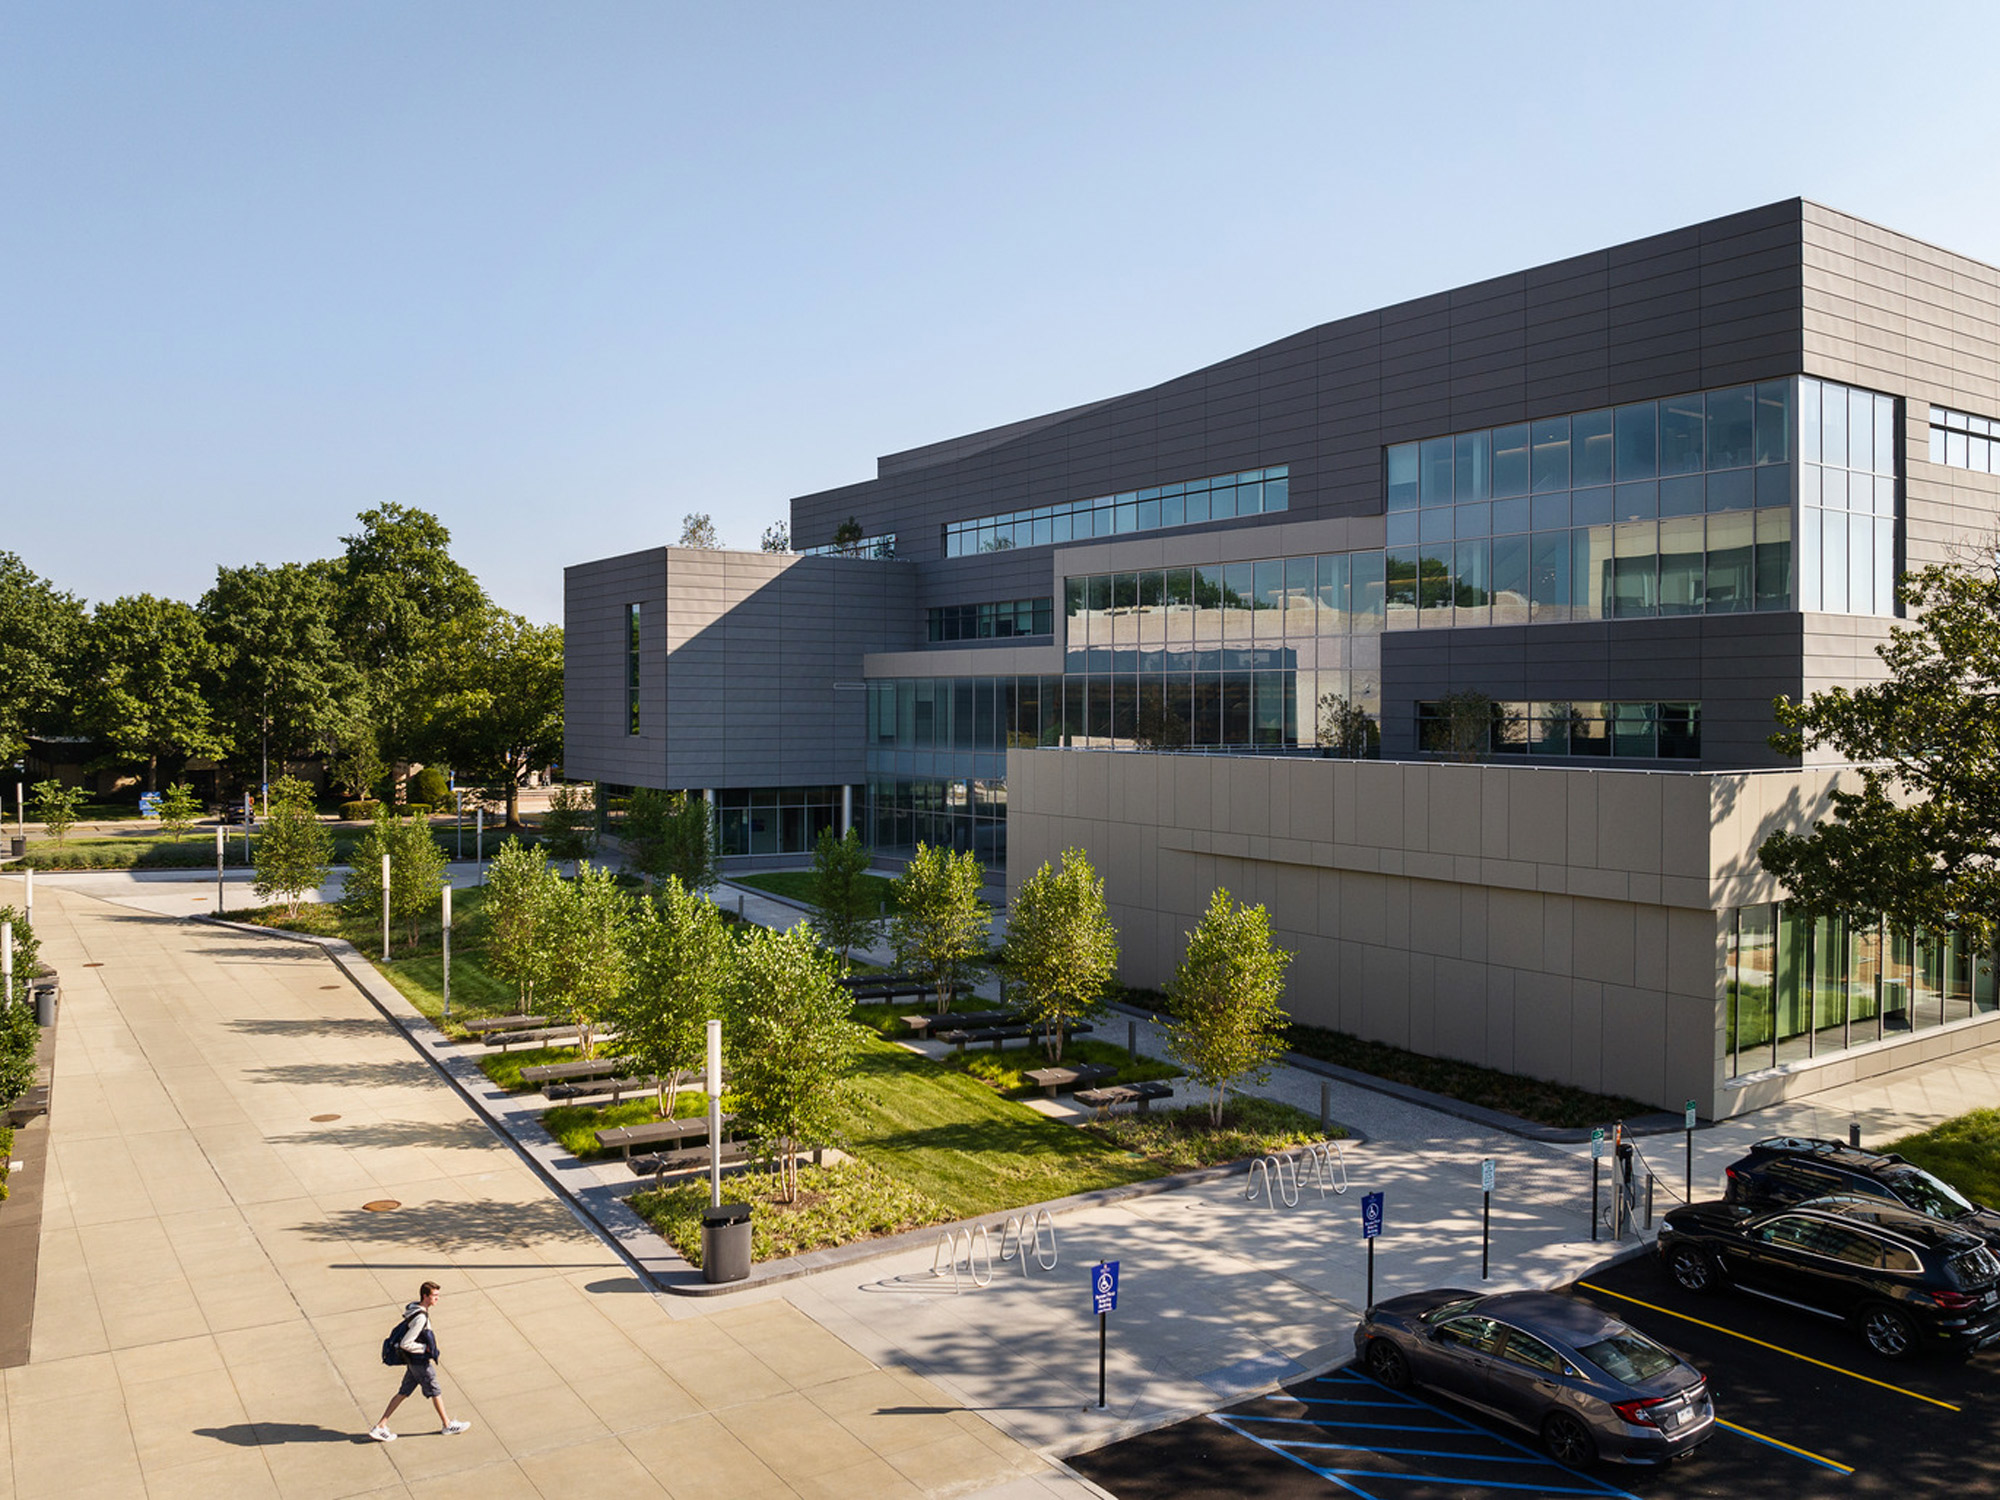 Modern educational building with a sleek design featuring expansive windows and a landscaped approach, with students and visitors making their way along the accessible pathways on a sunny day.